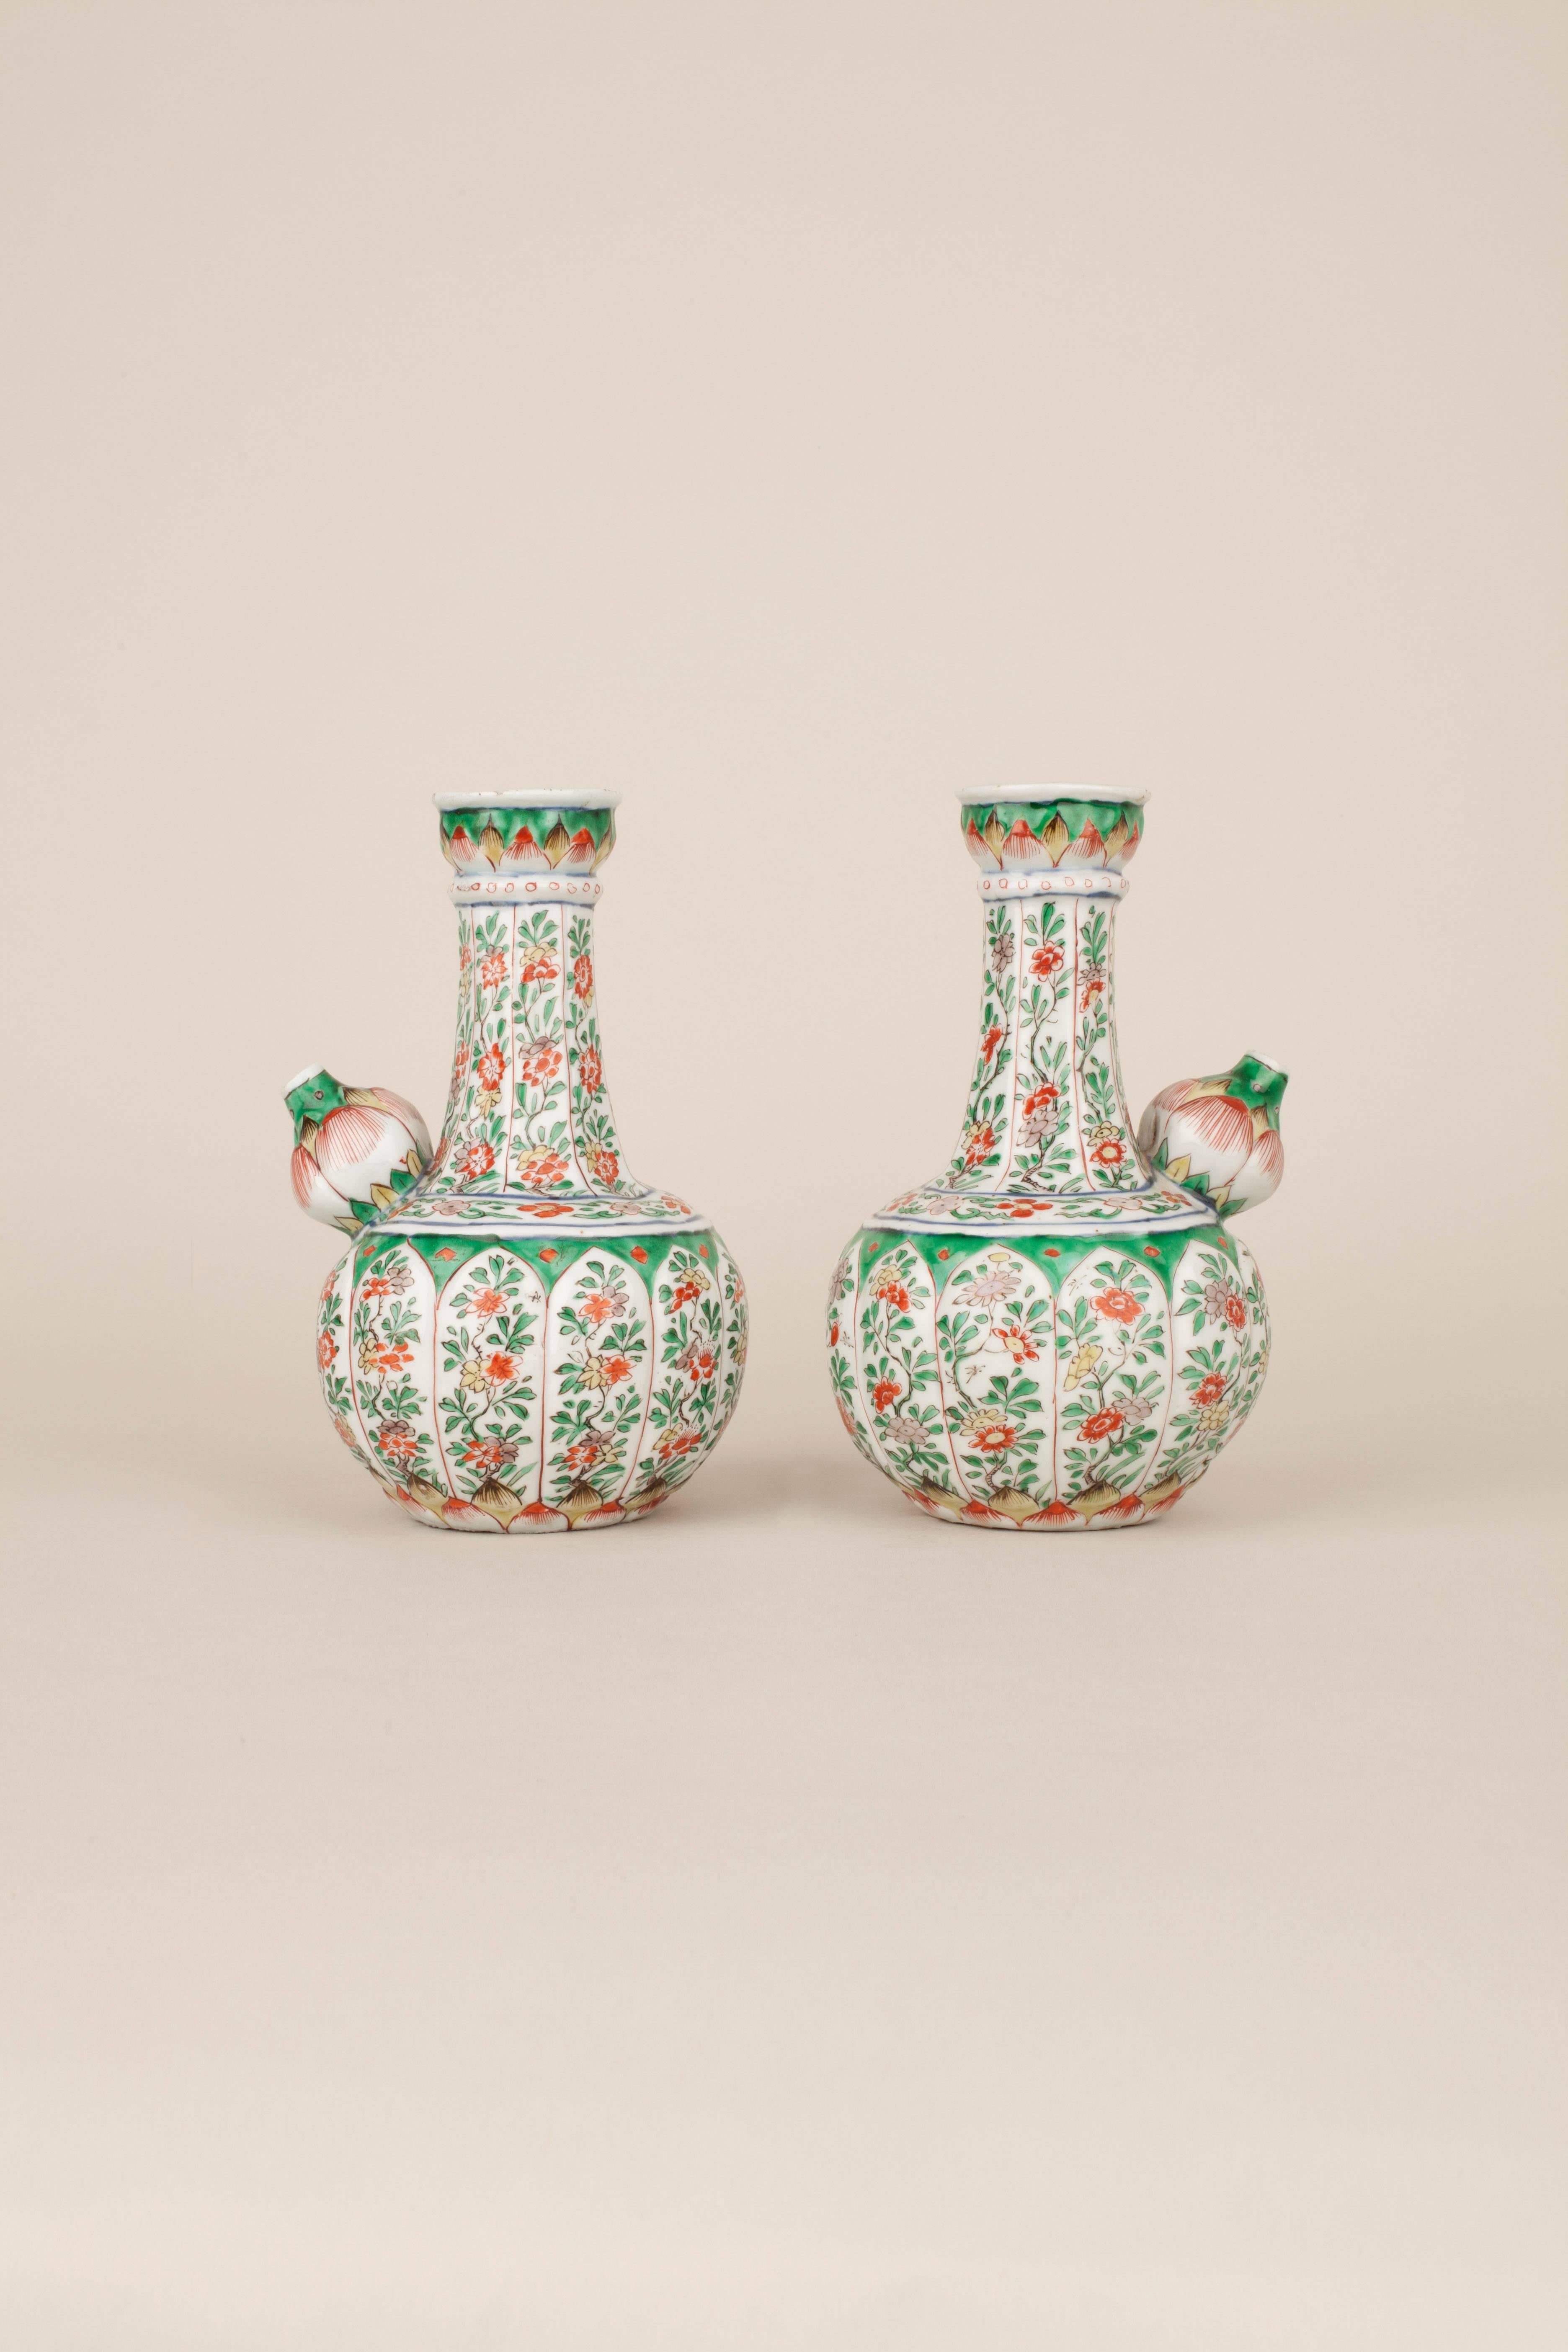 A pair of Chinese porcelain, famille verte moulded and fluted kendis.

A pair of Chinese porcelain, famille verte moulded and fluted kendis, the bodies of lotus flower form with twelve large petals each painted with branches of flowers, above two